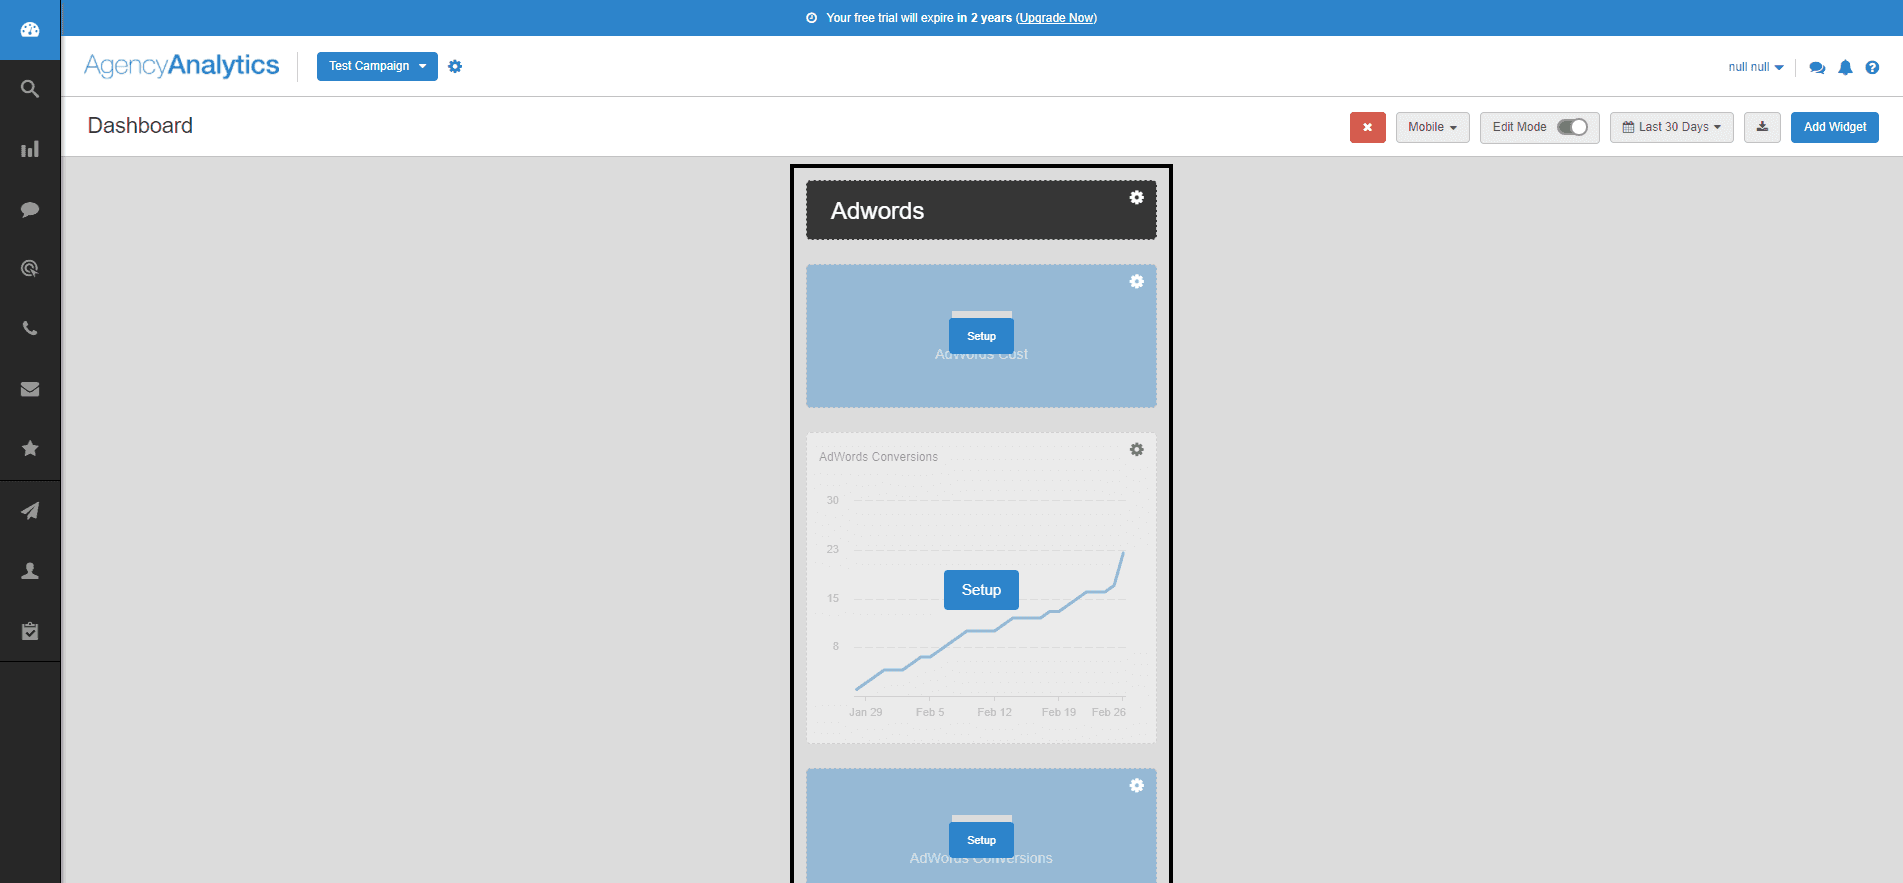 Mobile view for marketing reports